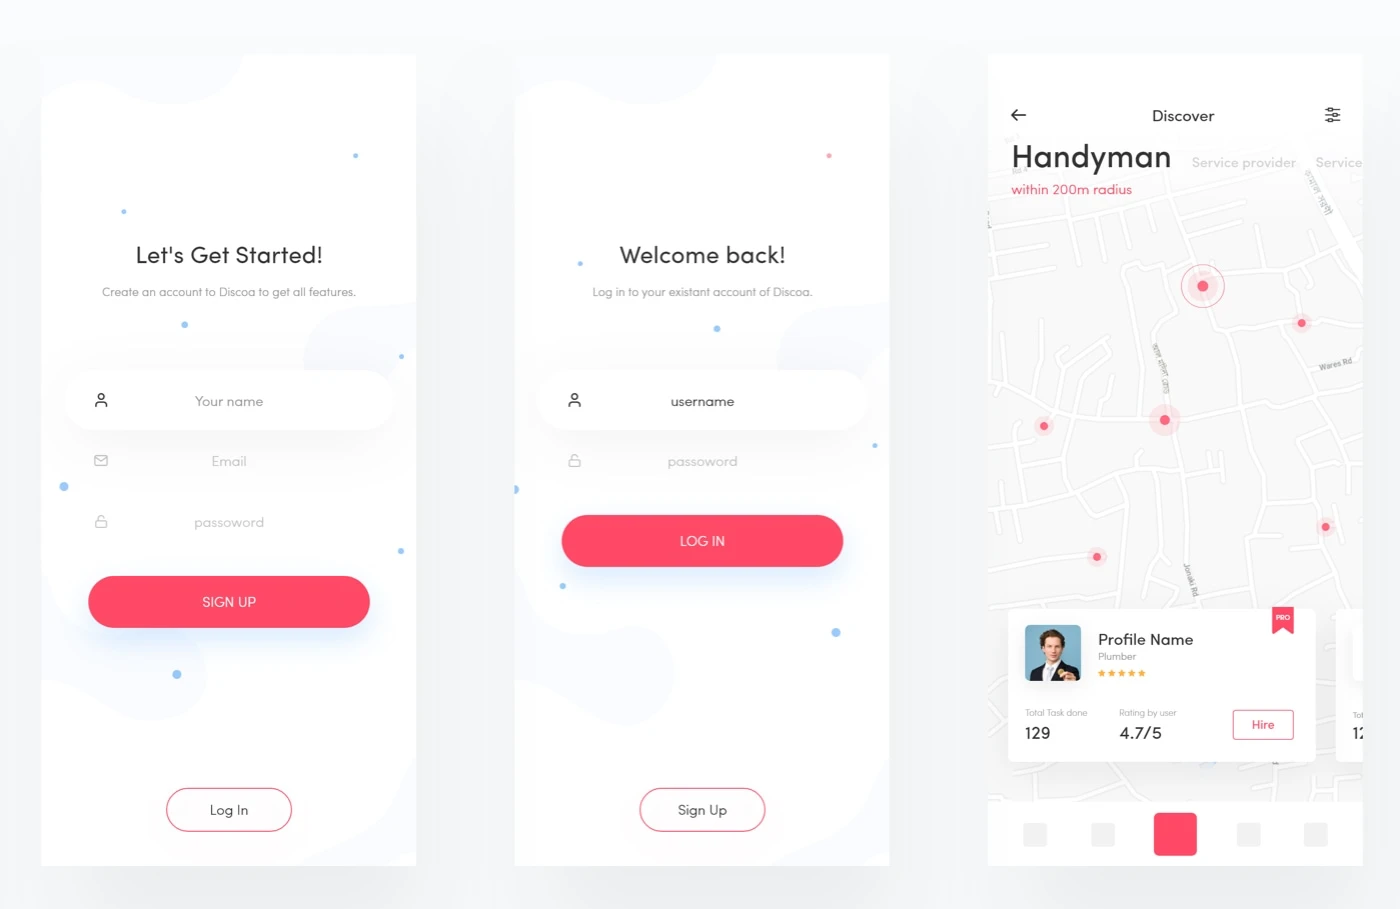 Handyman App UI Kit For Adobe XD - Including 7 iPhone X screens and 2 onboarding illustration. It's designed in Adobe XD.